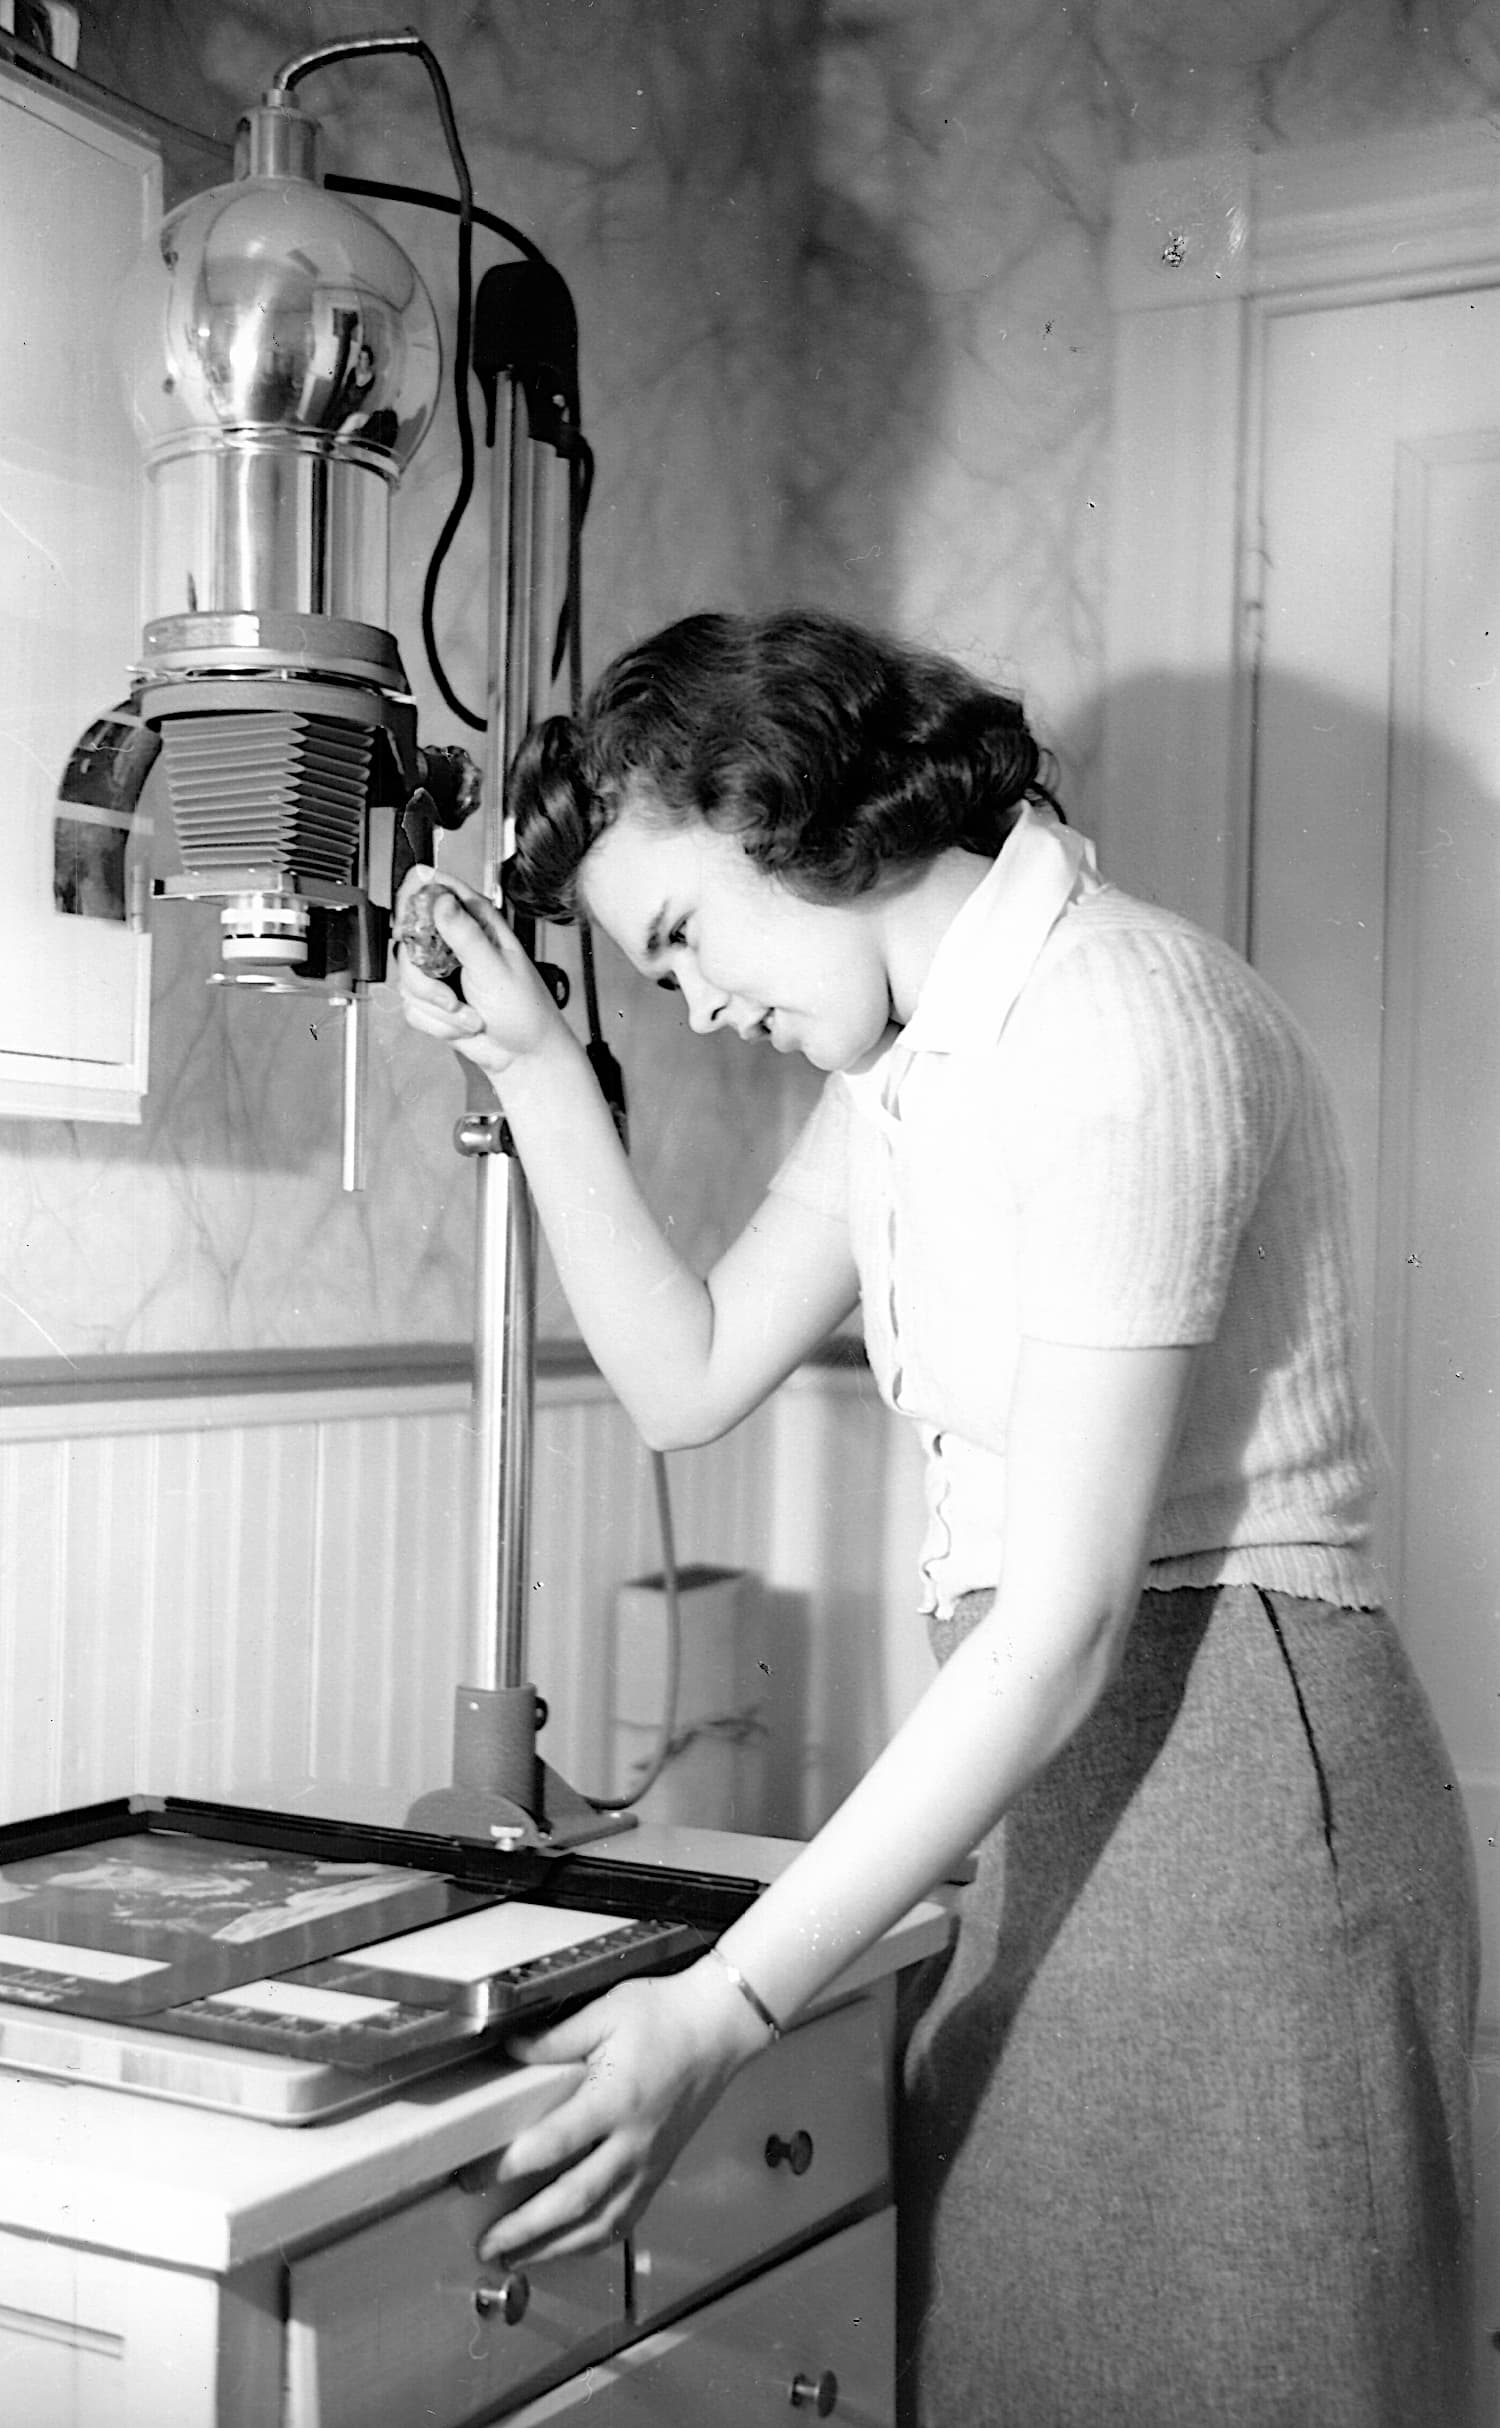 Thelma Pepper about 19 years old operating a photo printing stand.